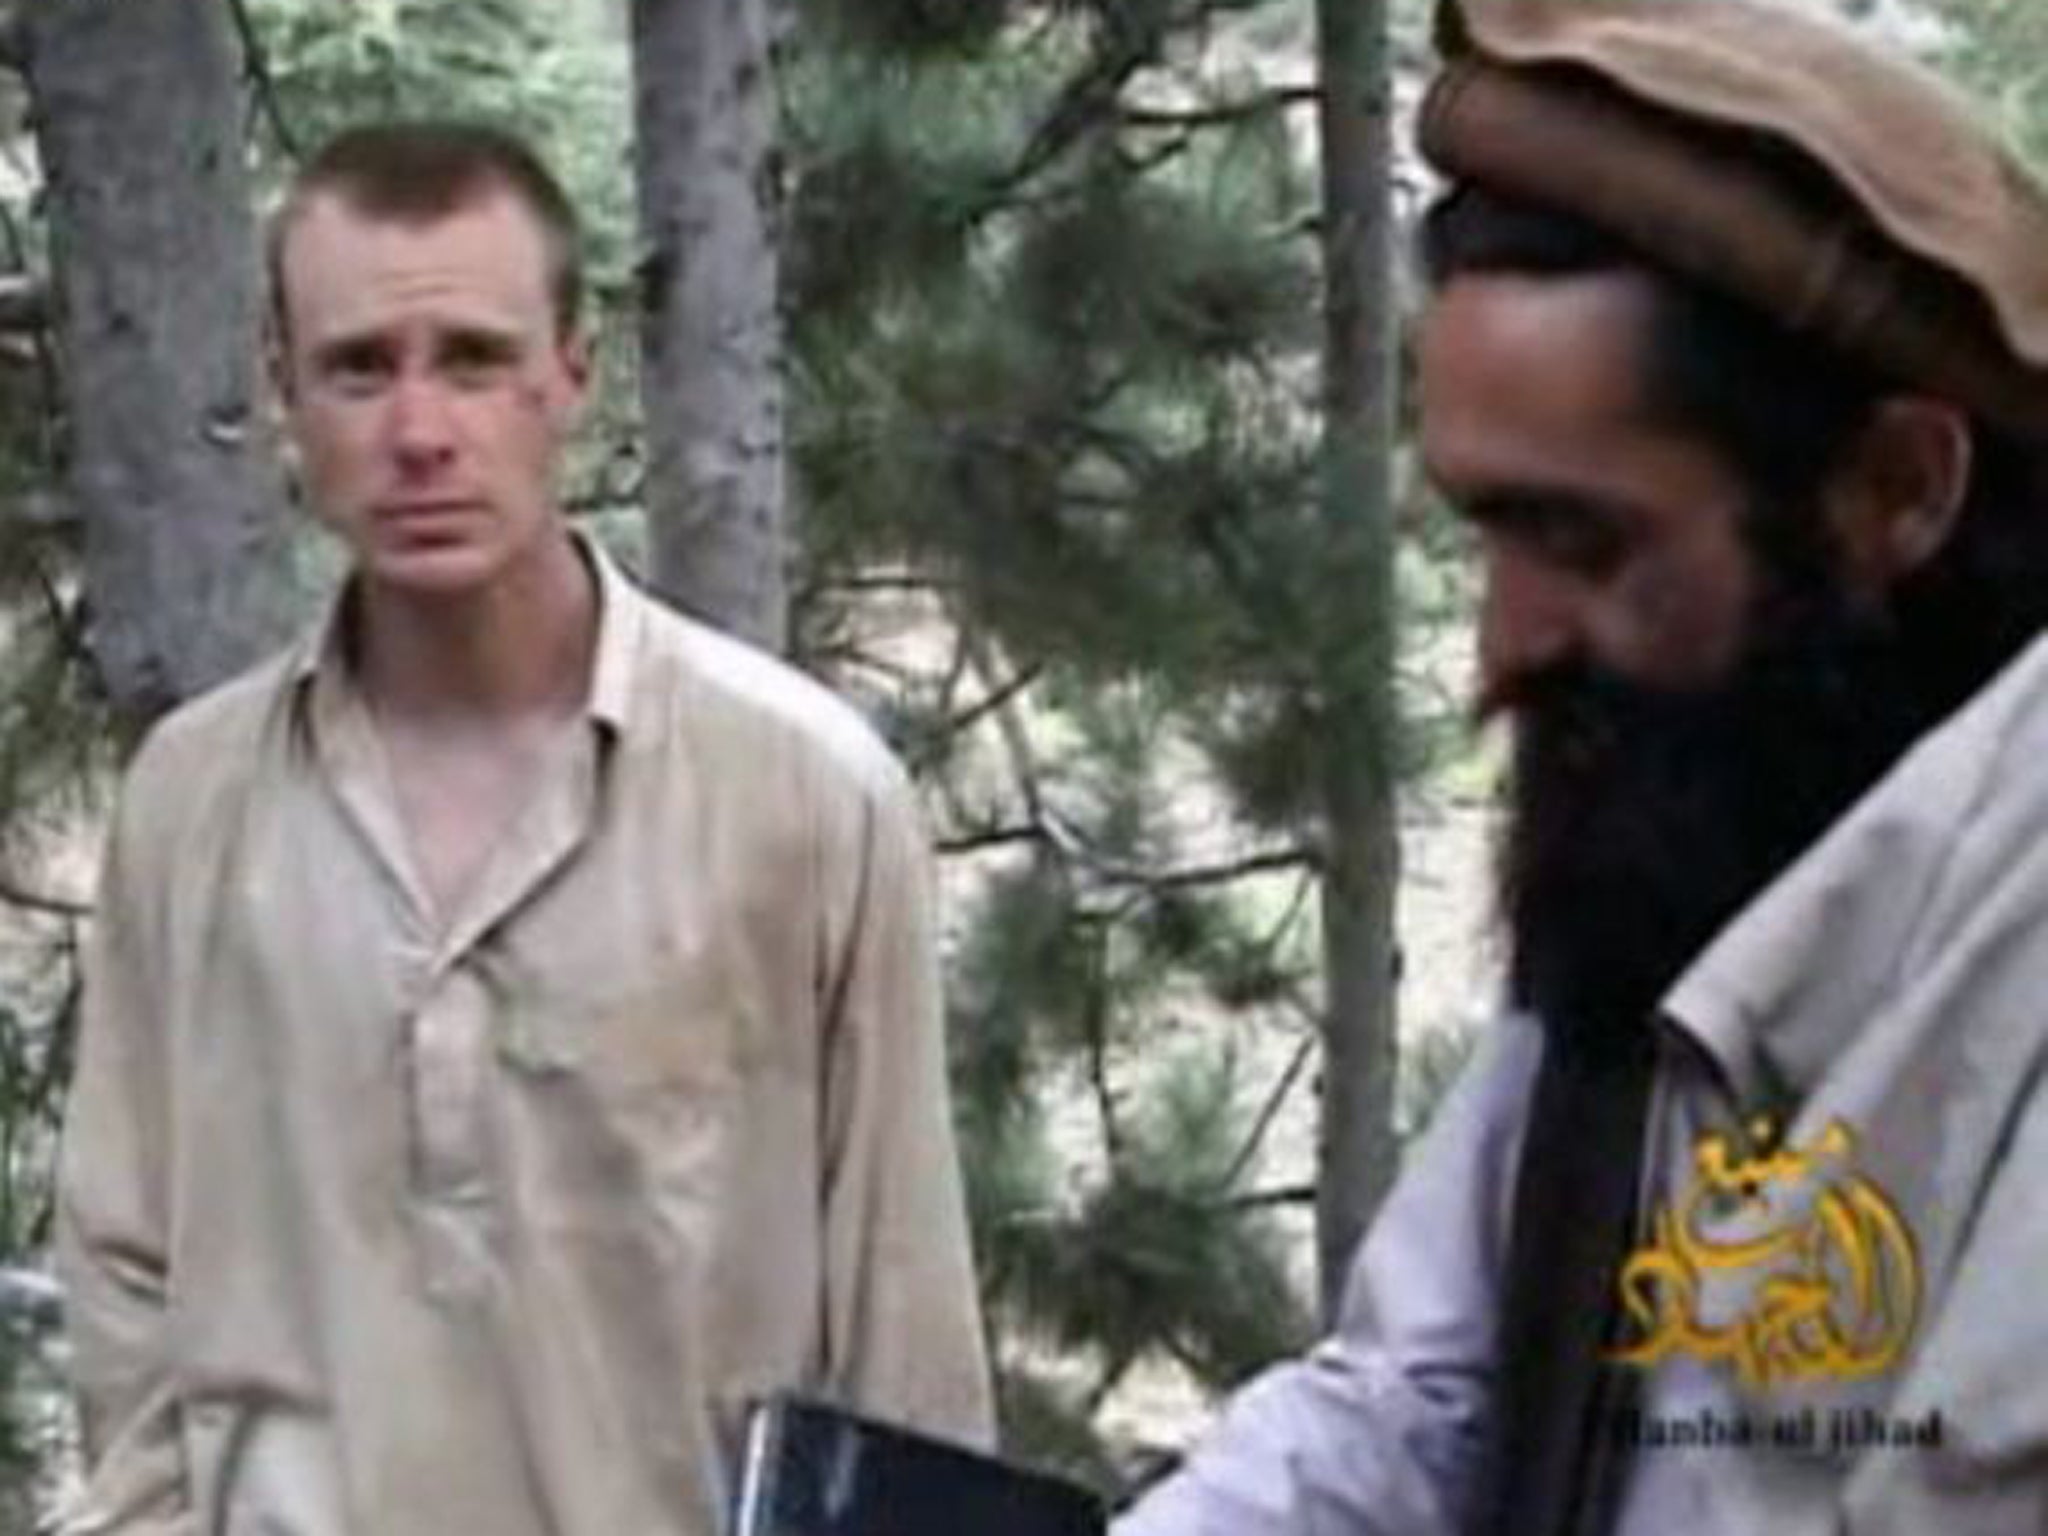 Sergeant Bowe Bergdahl, 27, from Hailey, Idaho (believed to be the man on the left), has been held captive since 2009 after going missing from his base in Afghanistan